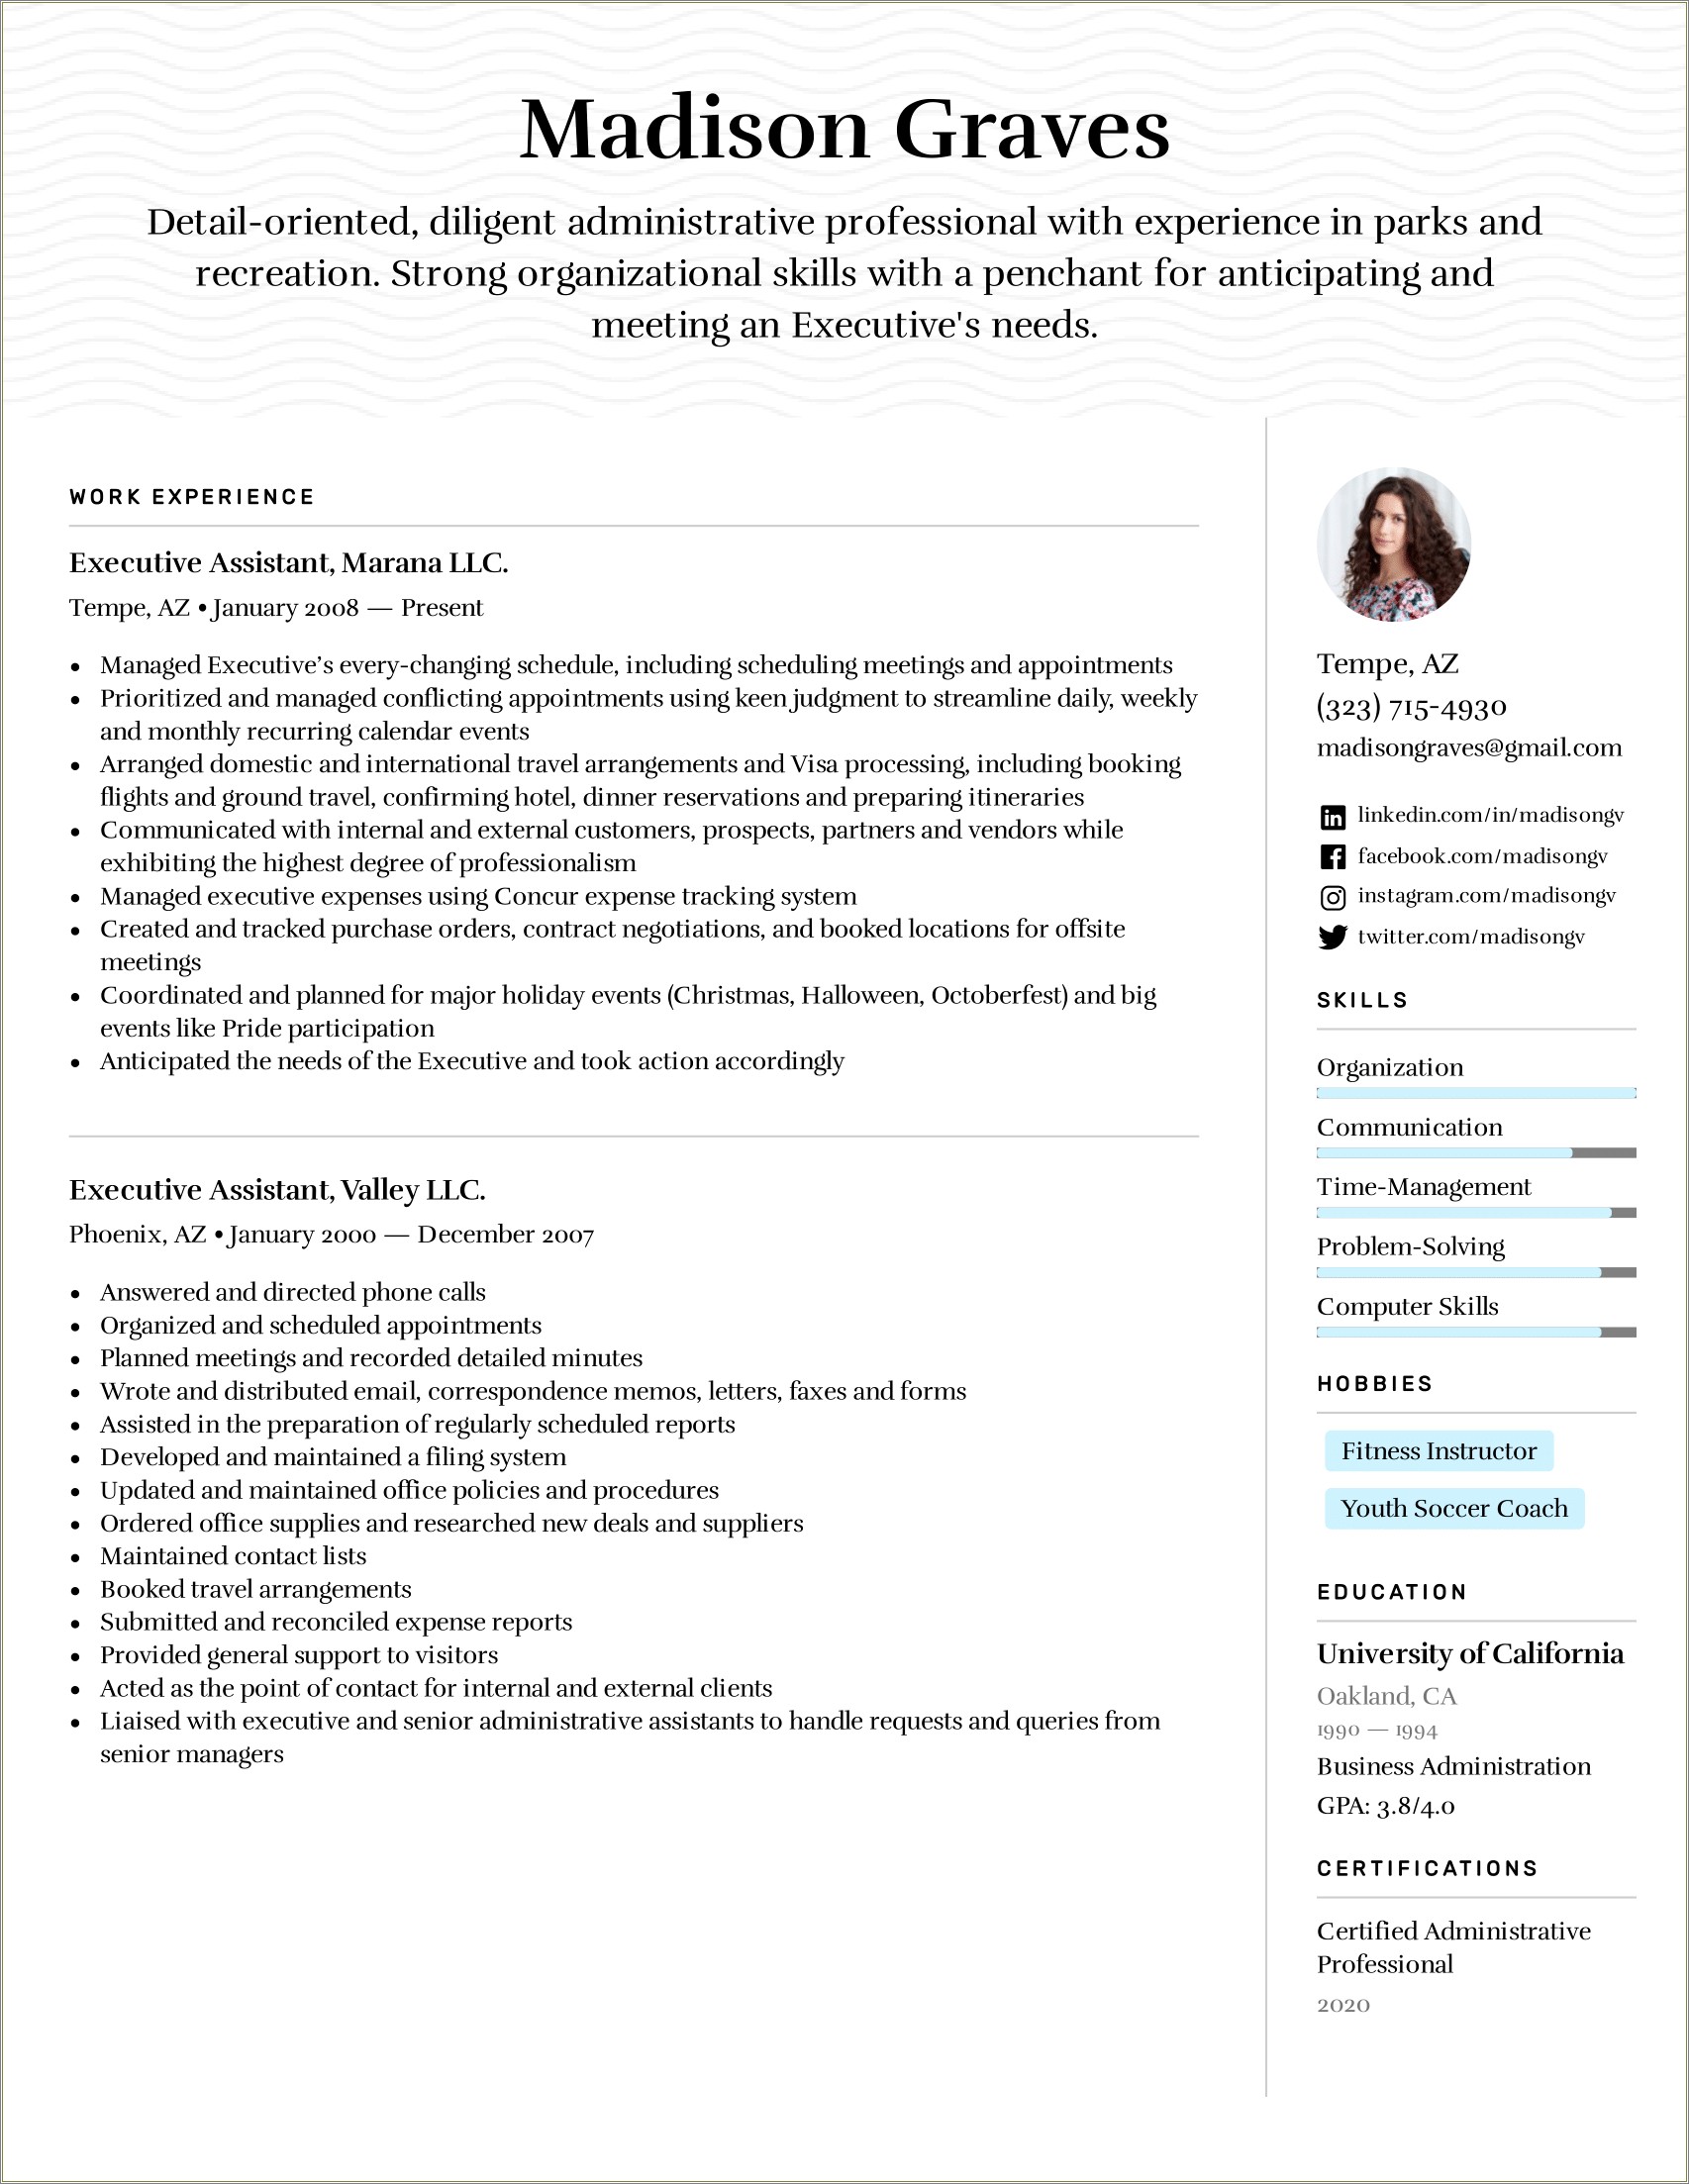 Functional Resume Example For Executive Assistant